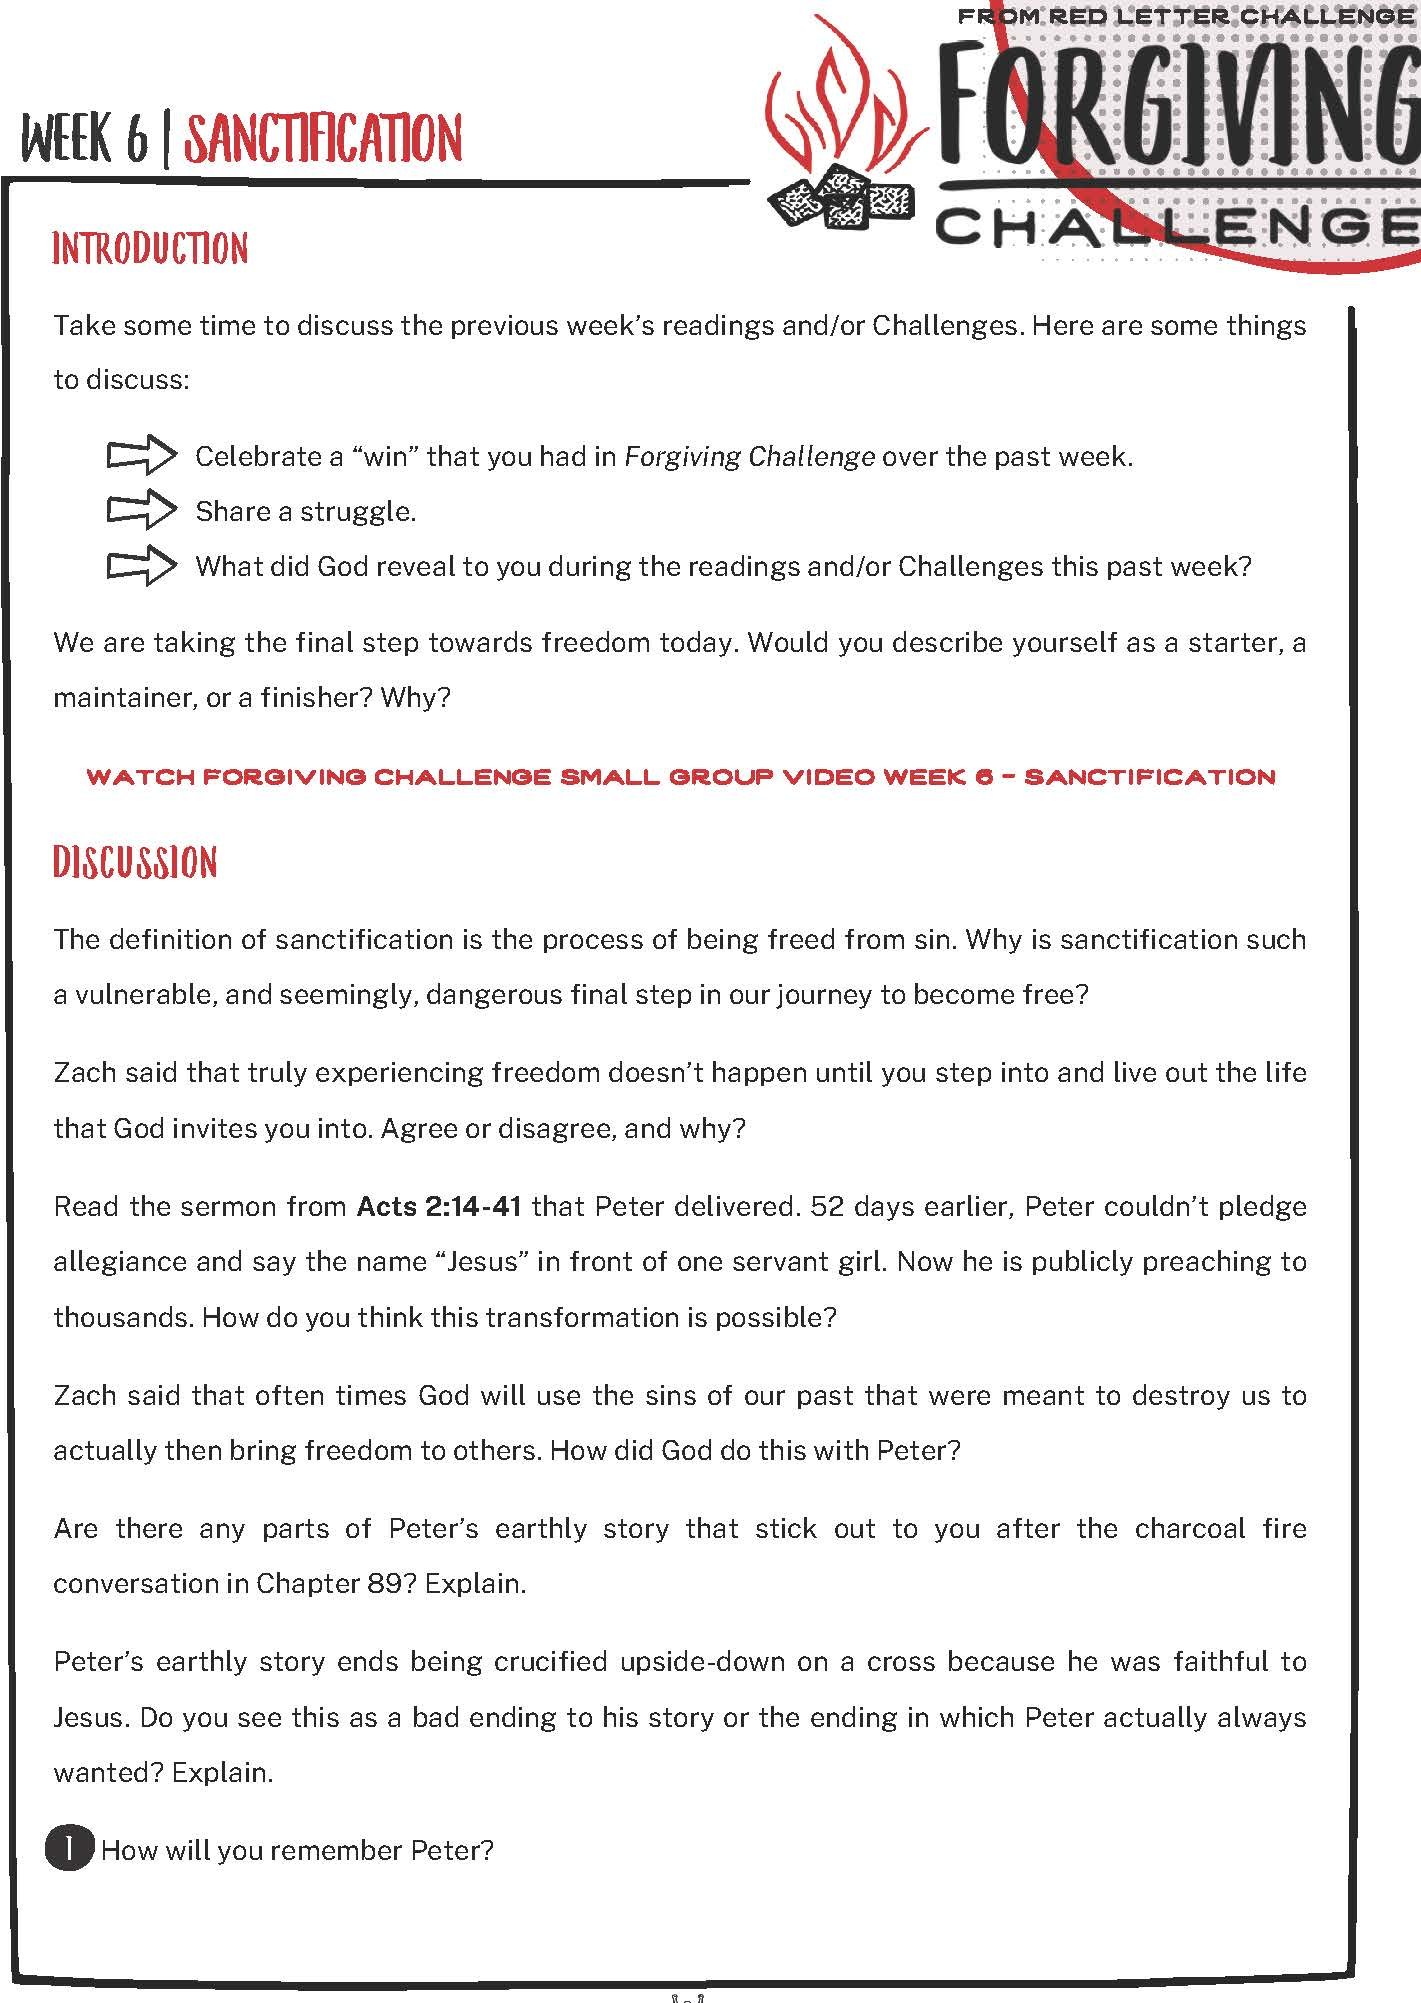 Forgiving Challenge Adult Small Group Discussion Guides_Page_19.jpg